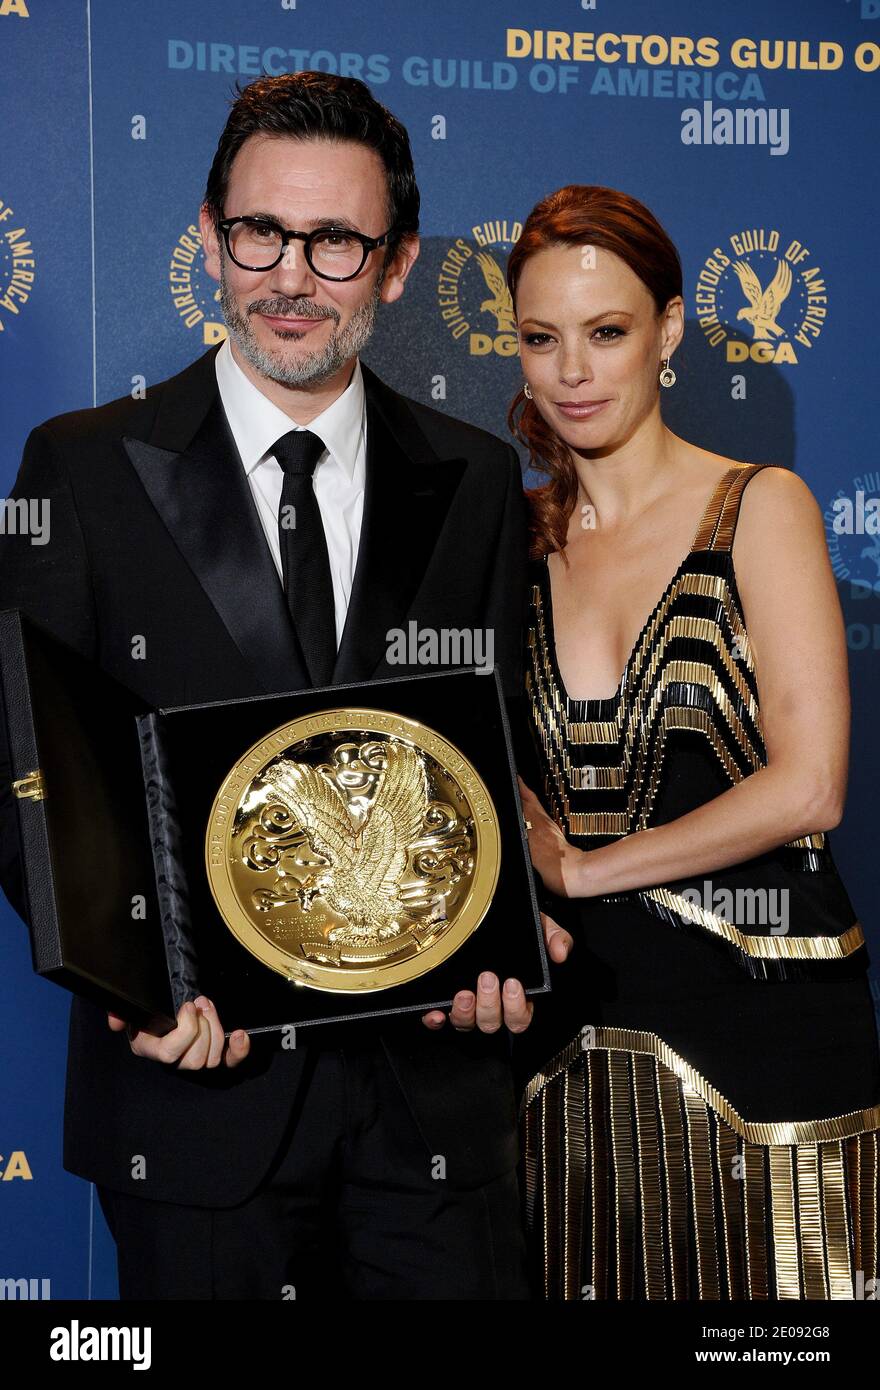 Director Michel Hazanavicius with Berenice Bejo, winner of the Outstanding Directorial Achievement in Feature Film for 2011 award for 'The Artist,' pose in the Press Room of the 64th Annual Directors Guild of America Awards in Los Angeles, January 28, 2012. Photo by Lionel Hahn/ABACAPRESS.COM Stock Photo